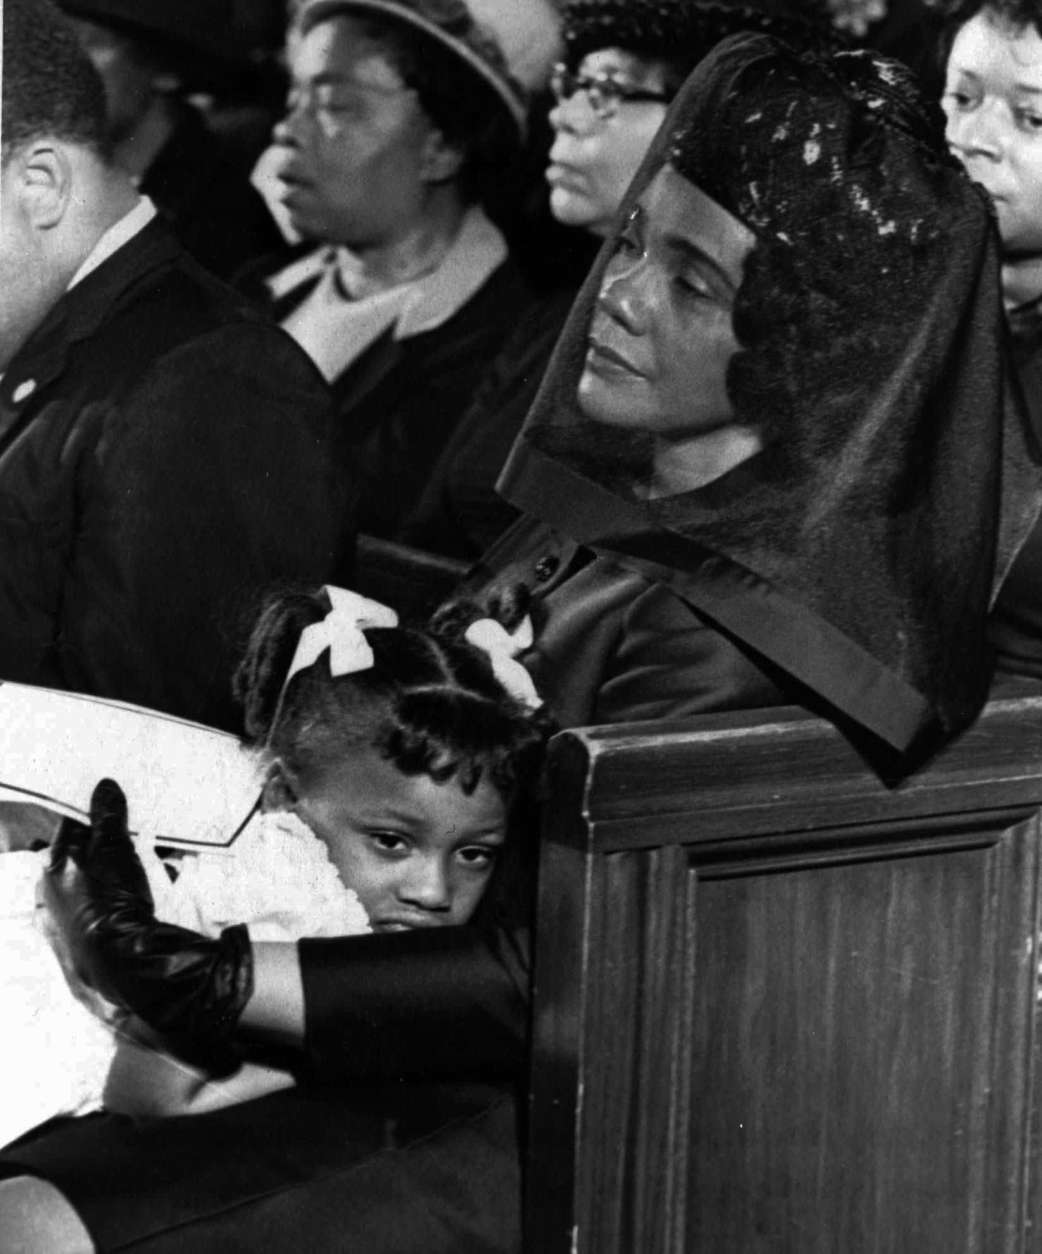 Coretta Scott King and her daughter, Bernice are shown April 9, 1968, in Atlanta, Ga. attending the funeral of her husband, Martin Luther King, Jr., in this Pulitzer-prize winning photograph taken by Moneta J. Sleet, Jr., the first African-American to win a Pulitzer Prize for photography.  (AP Photo/Moneta J. Sleet, Jr.)